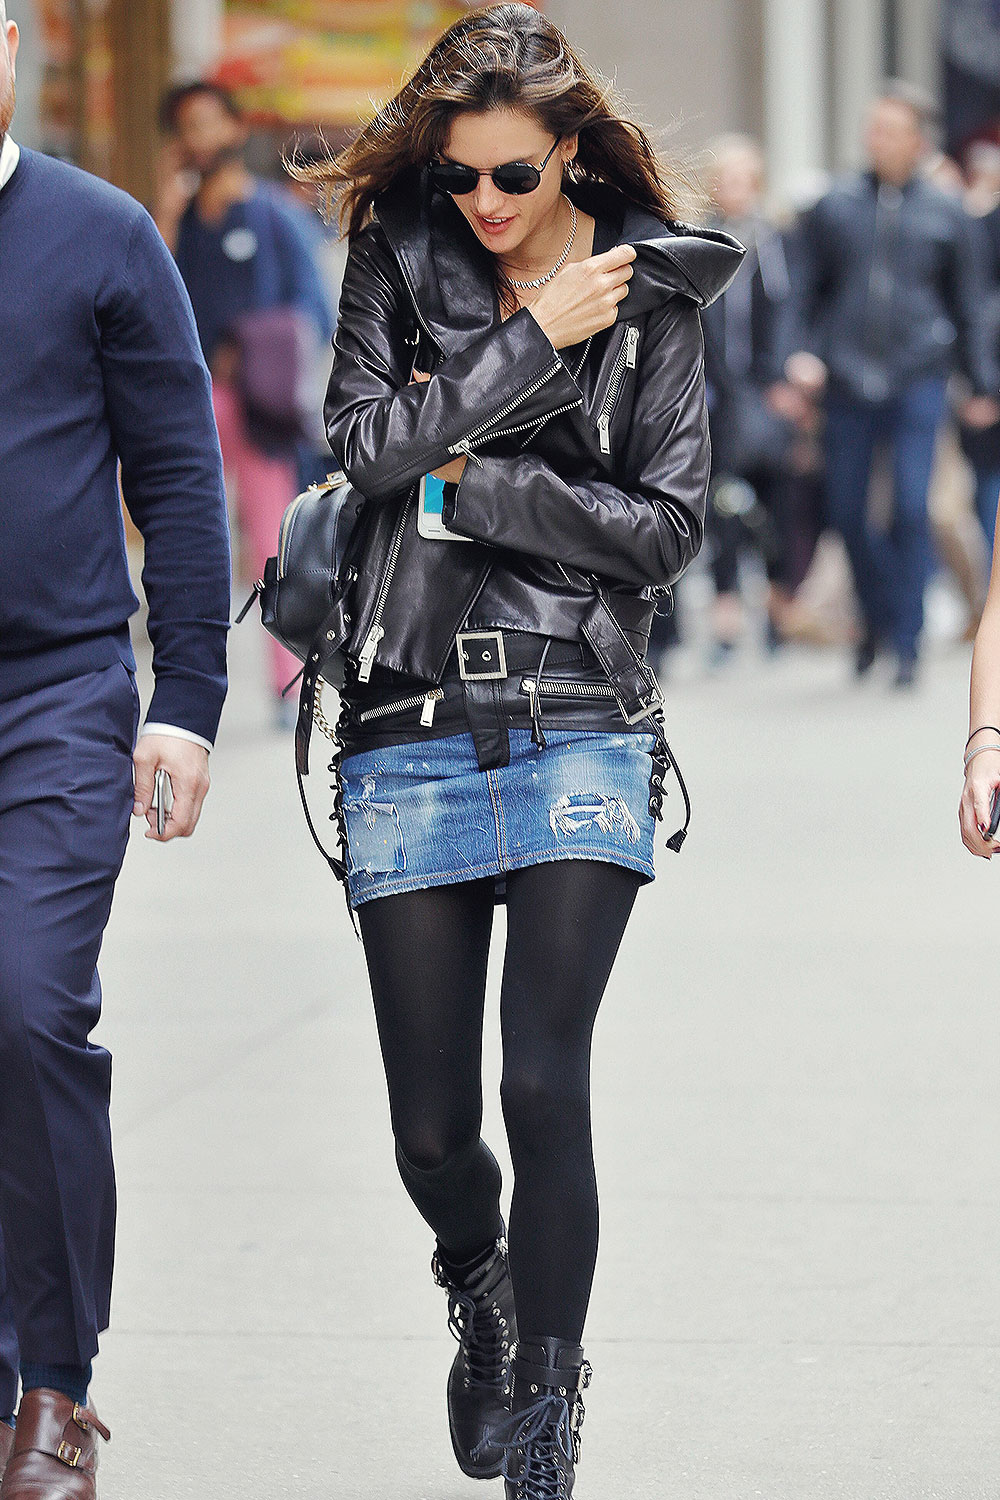 Alessandra Ambrosio out in NYC